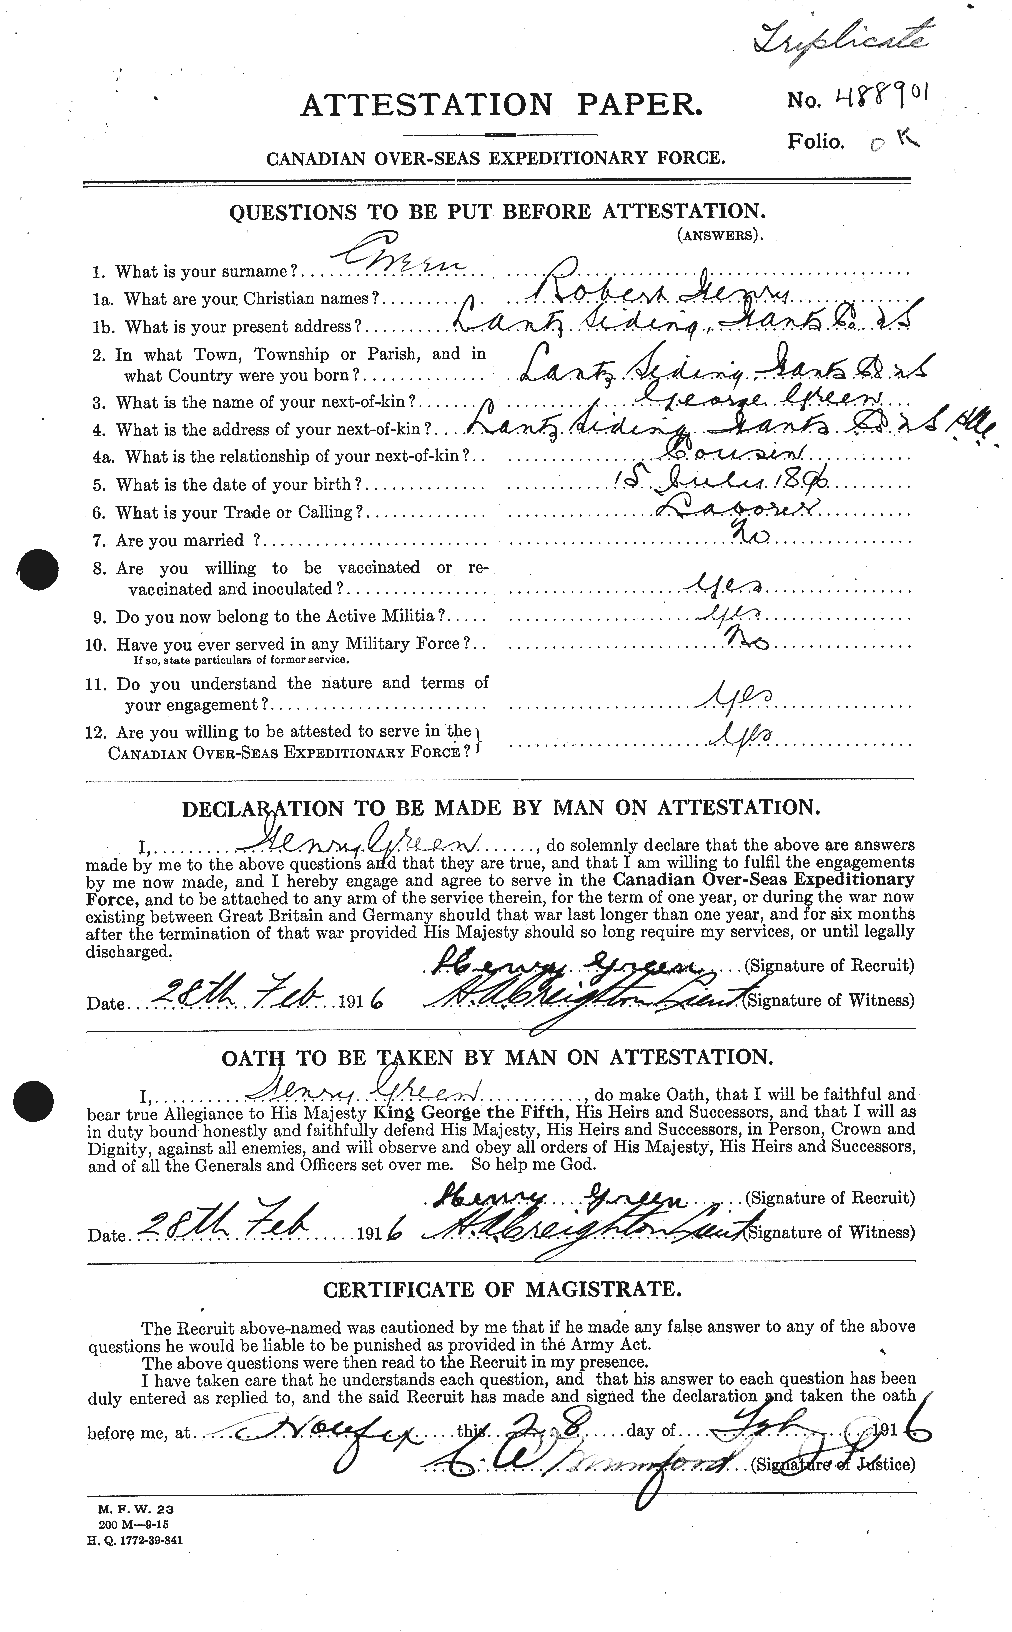 Personnel Records of the First World War - CEF 363651a